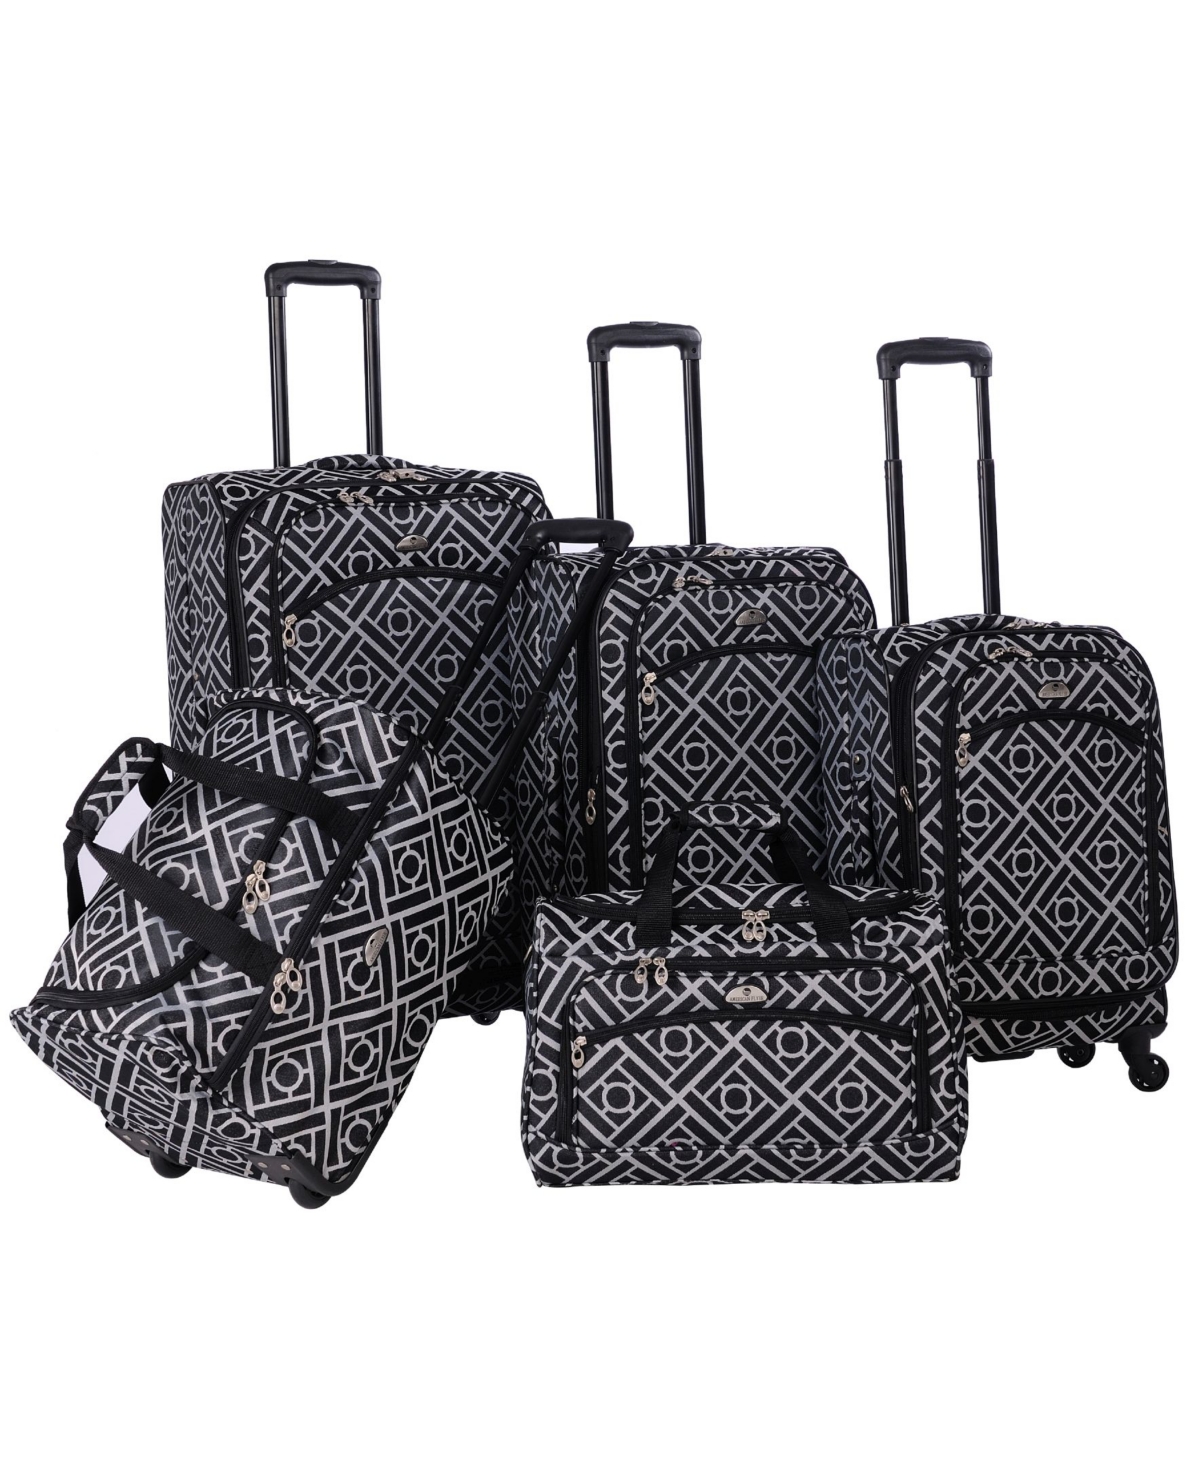 Astor Collection 5 Piece Luggage Set - Black